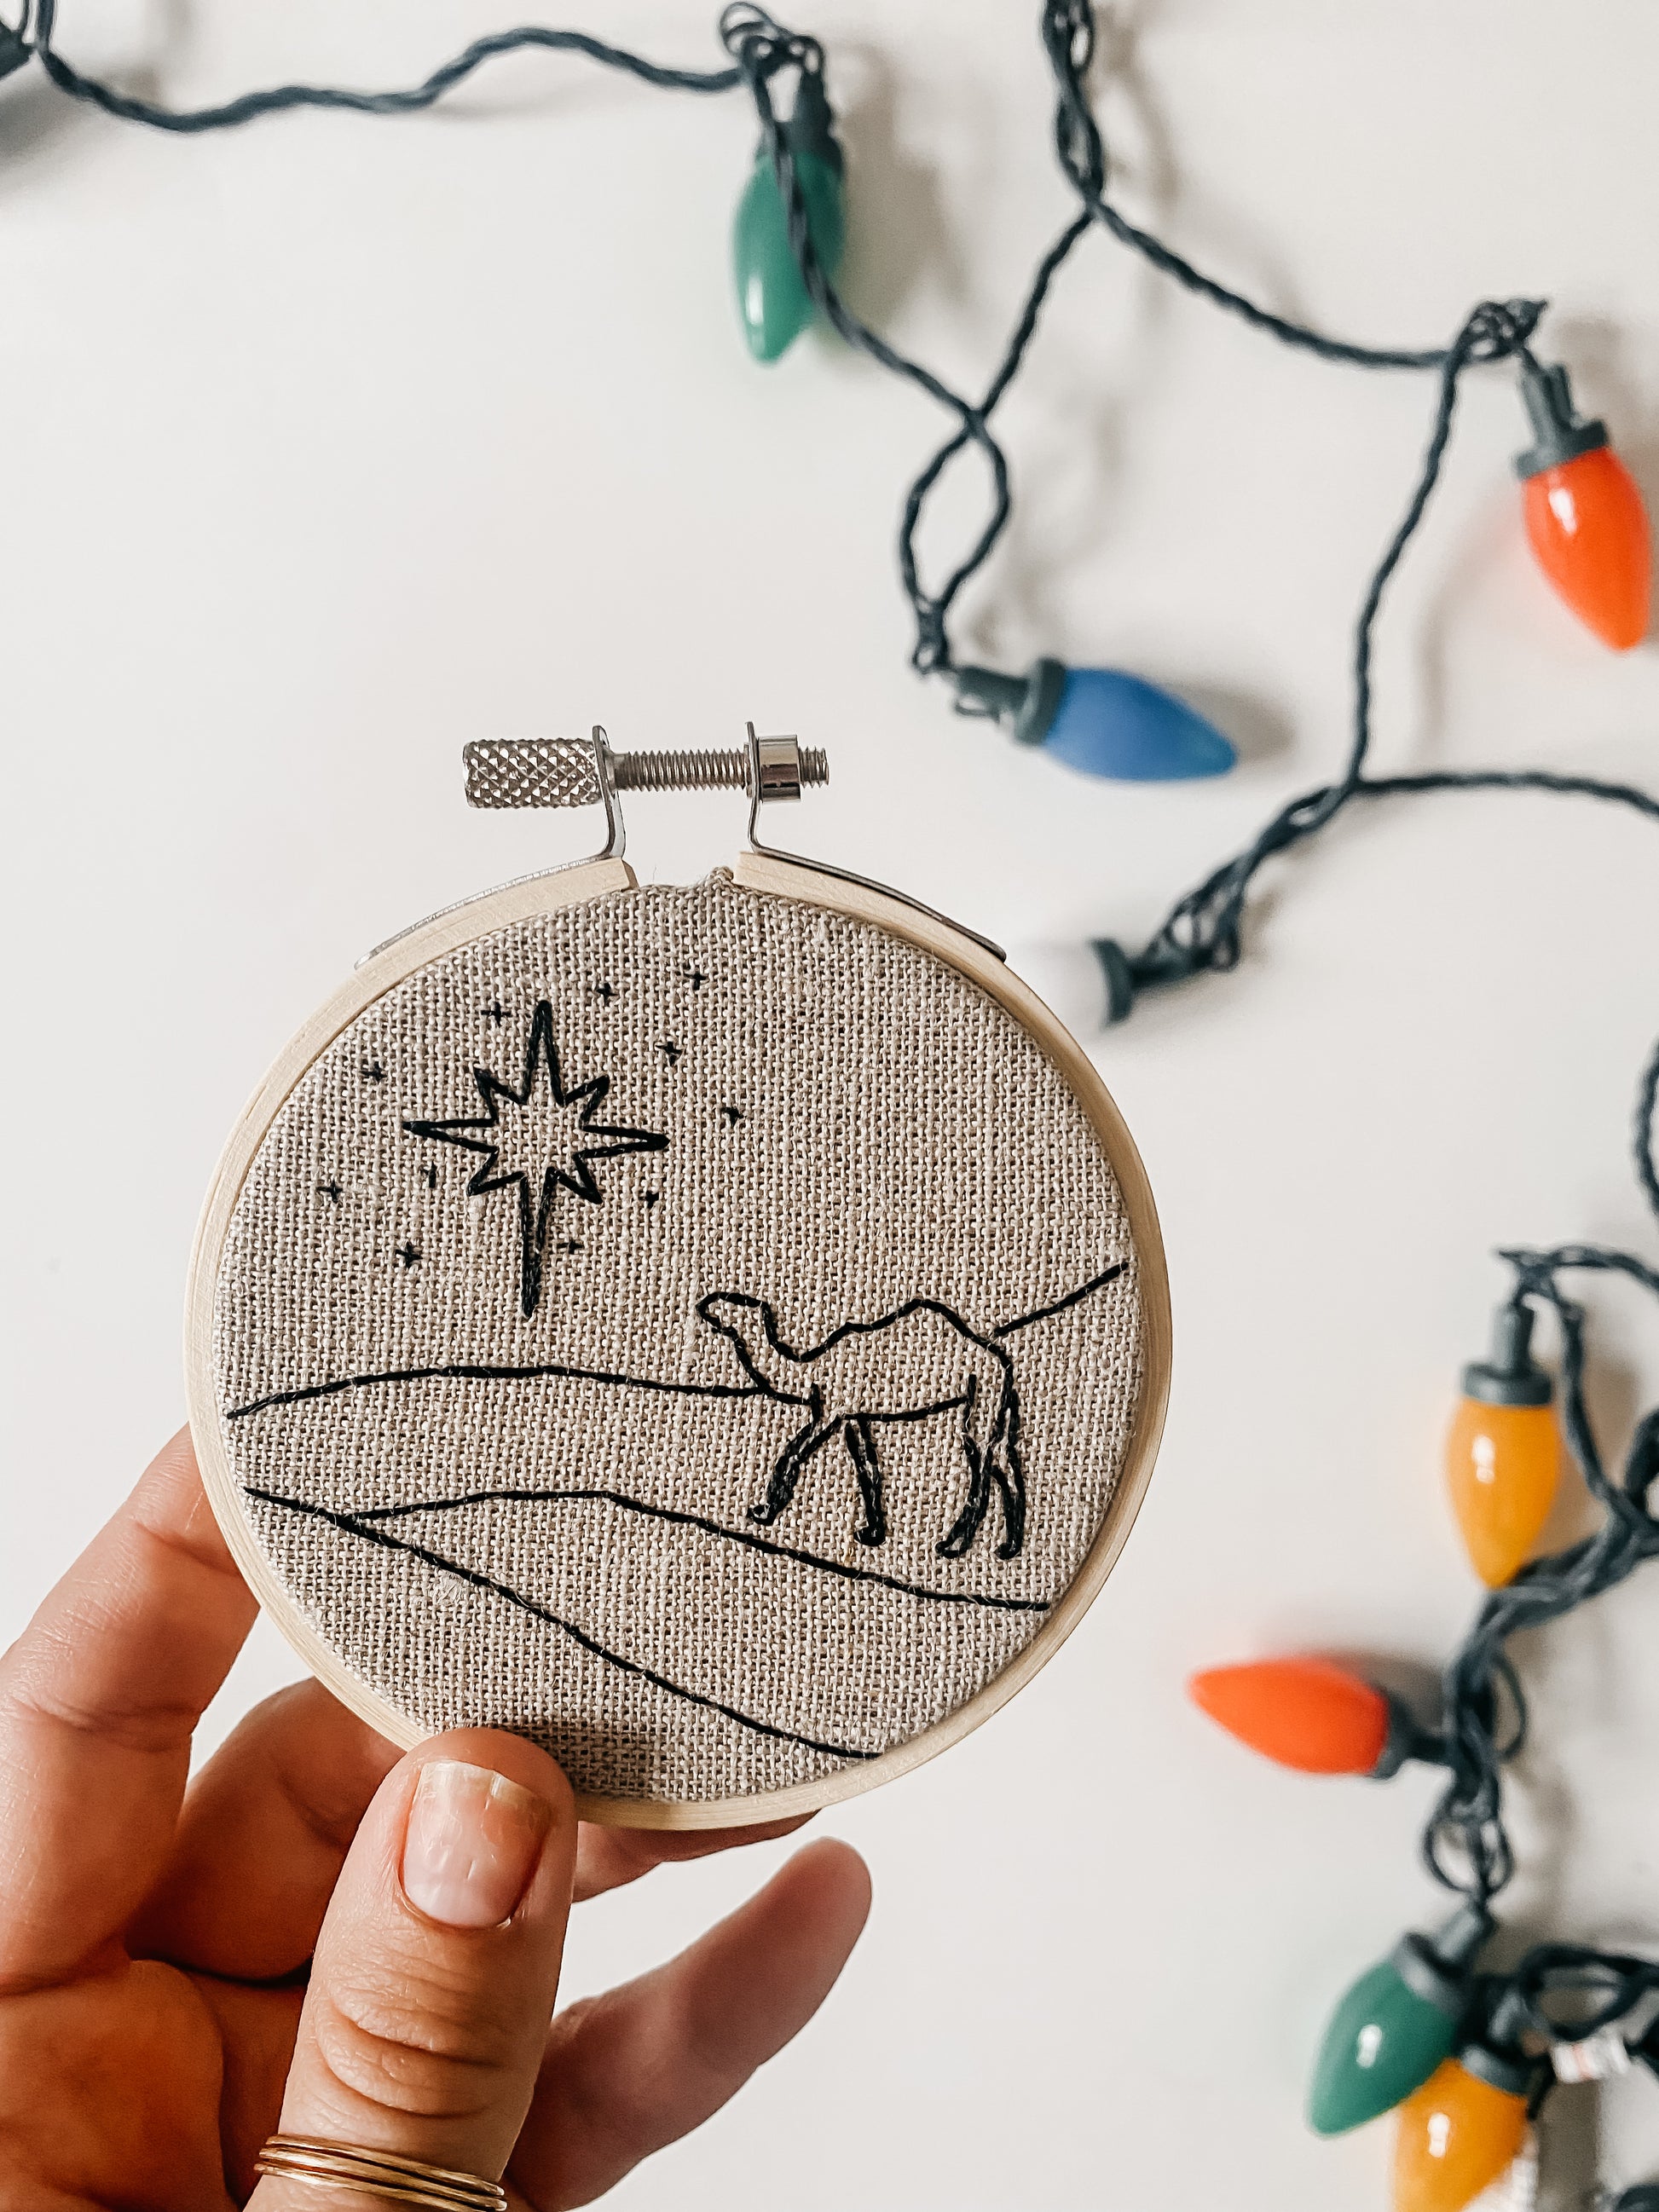 Star of Bethlehem DIY Mini Embroidery Kit With Tutorial Guide Do It  Yourself Handmade Ornament Christmas Gifts for Her Holiday Crafts Mom 